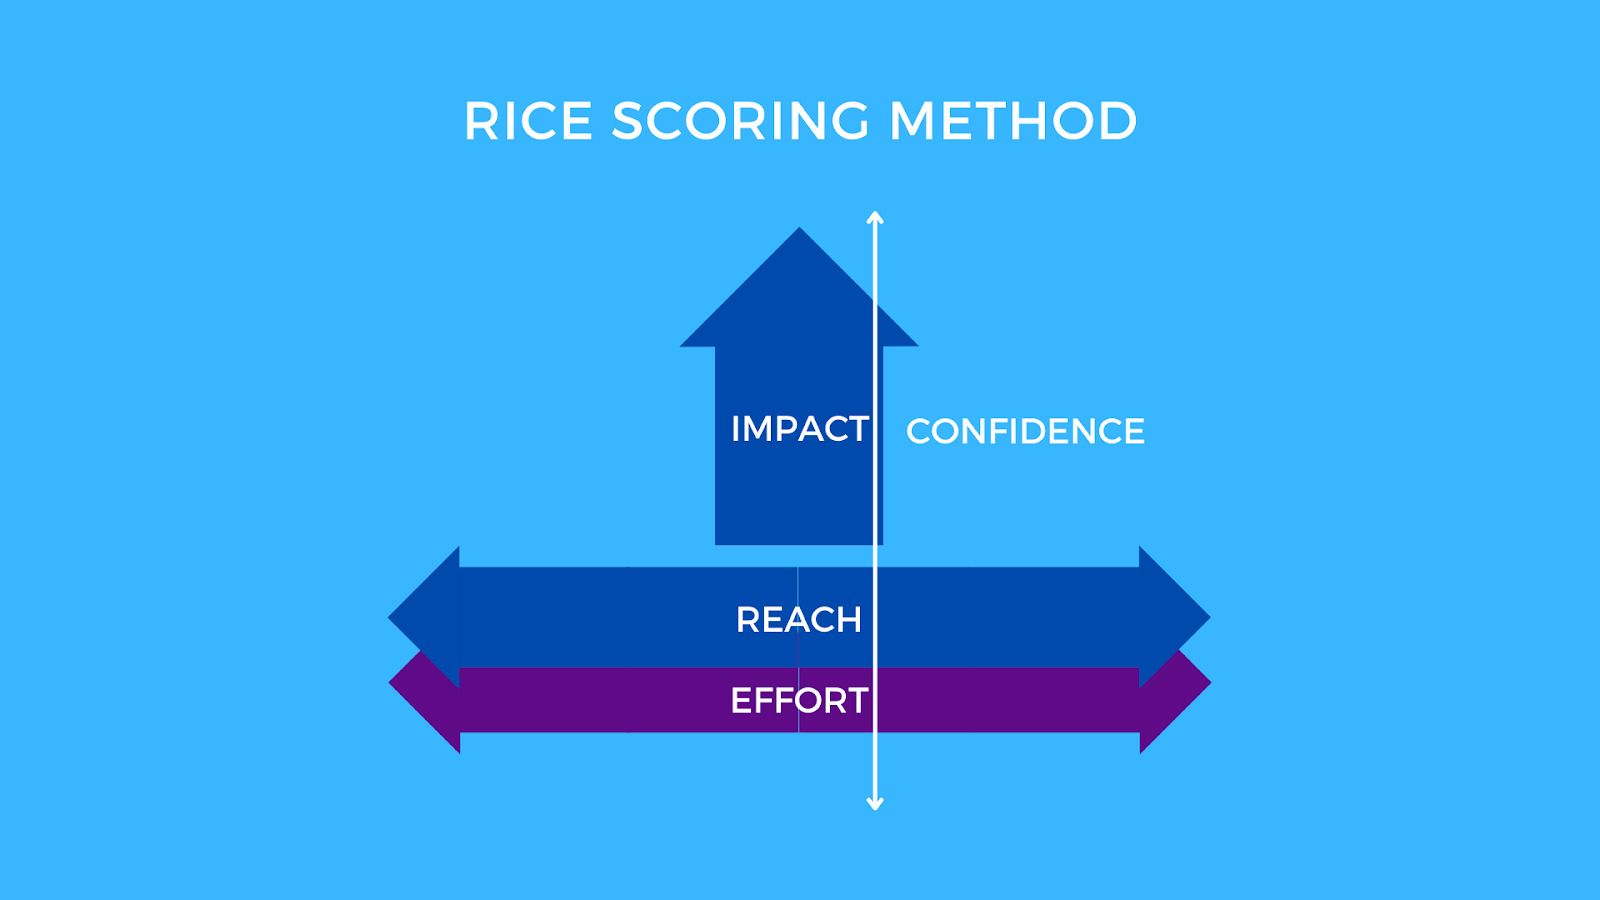 A product manager using the RICE framework to prioritize initiatives